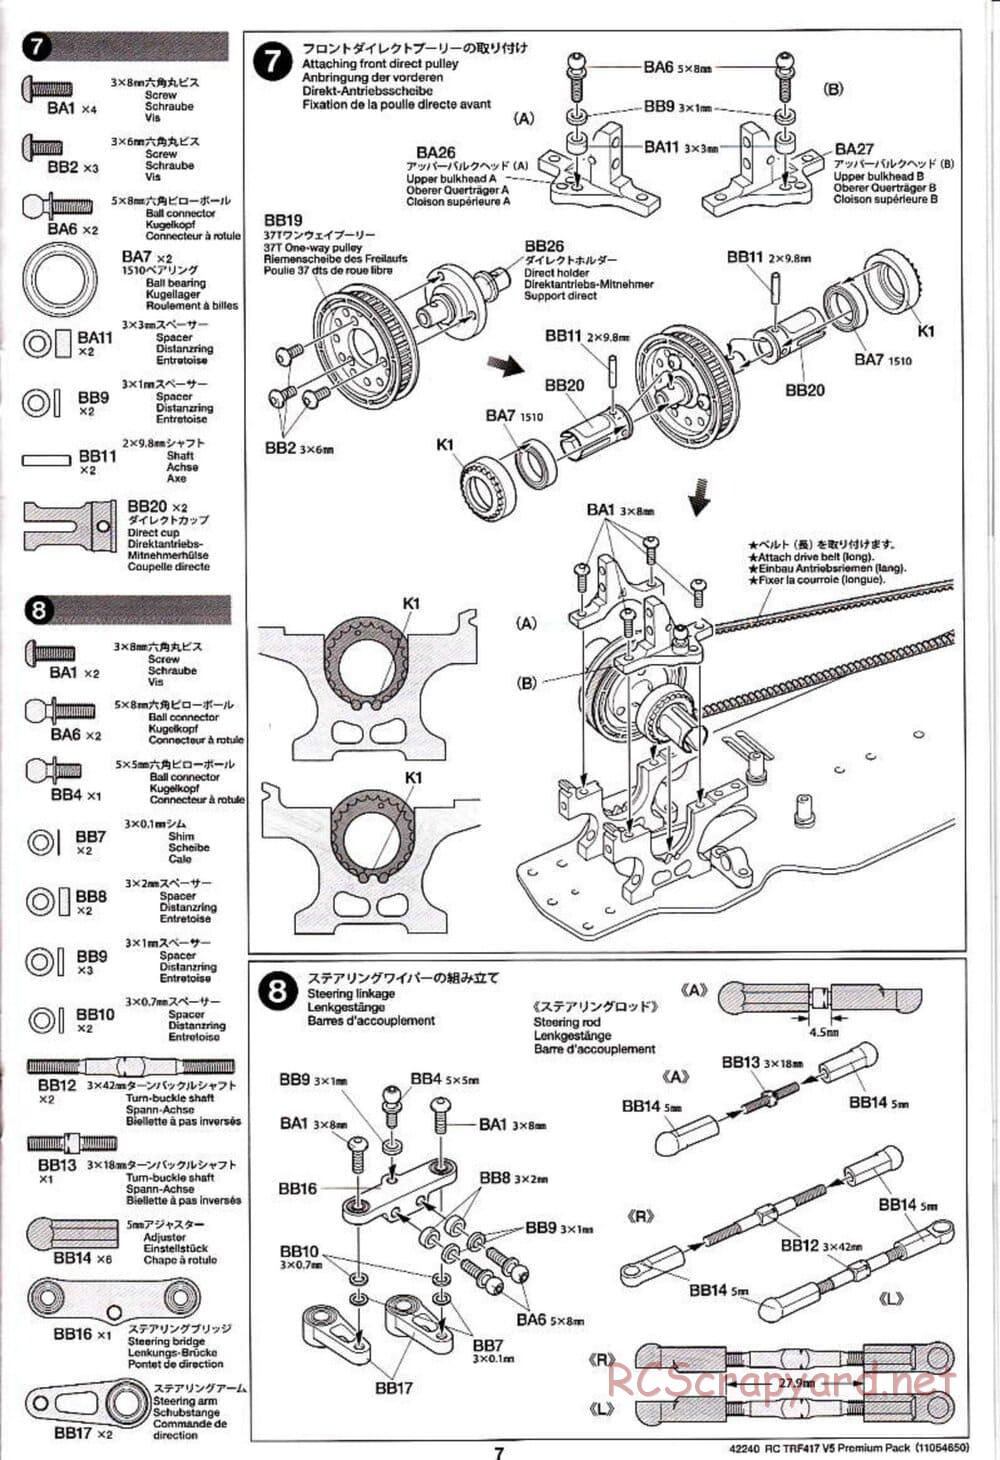 Tamiya - TRF417 V5 Premium Package Chassis - Manual - Page 7